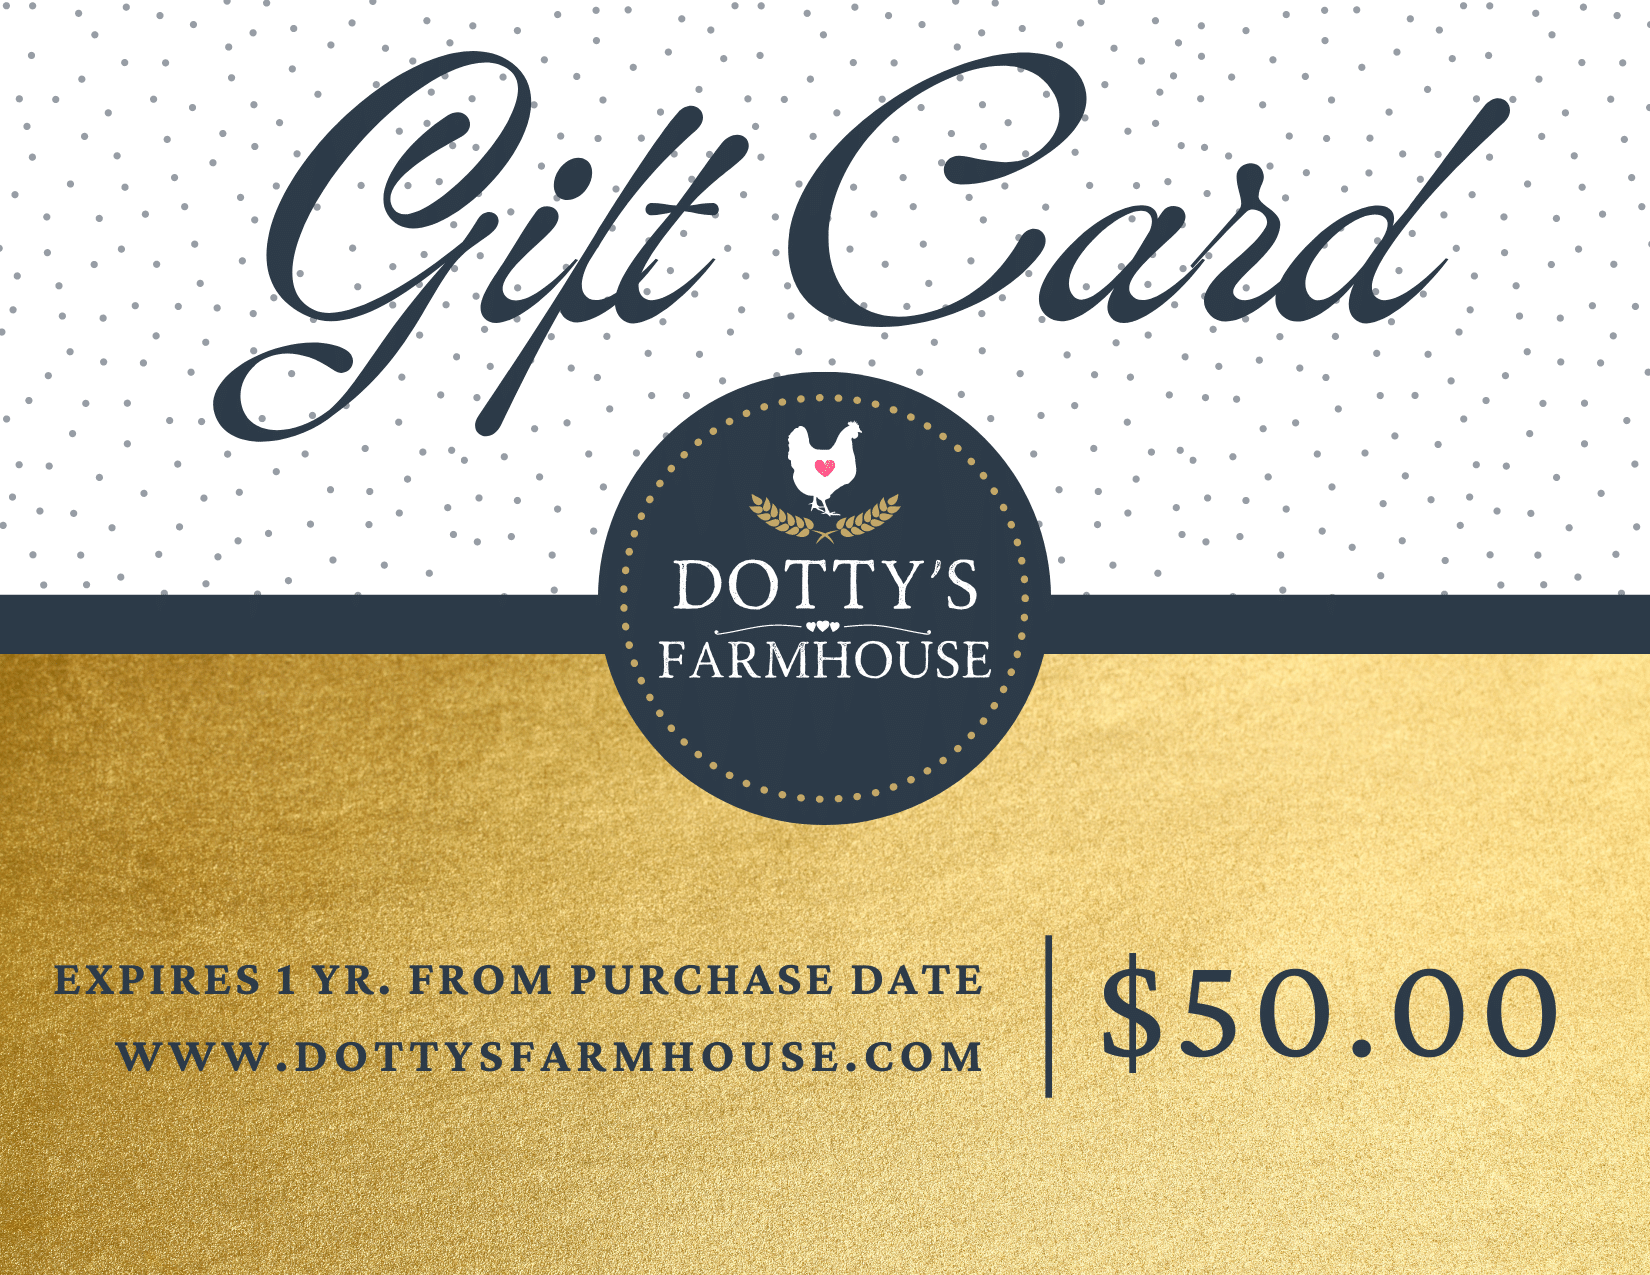 Gift Cards $50.00 / Email Gift Card Dotty's Farmhouse Gift Card